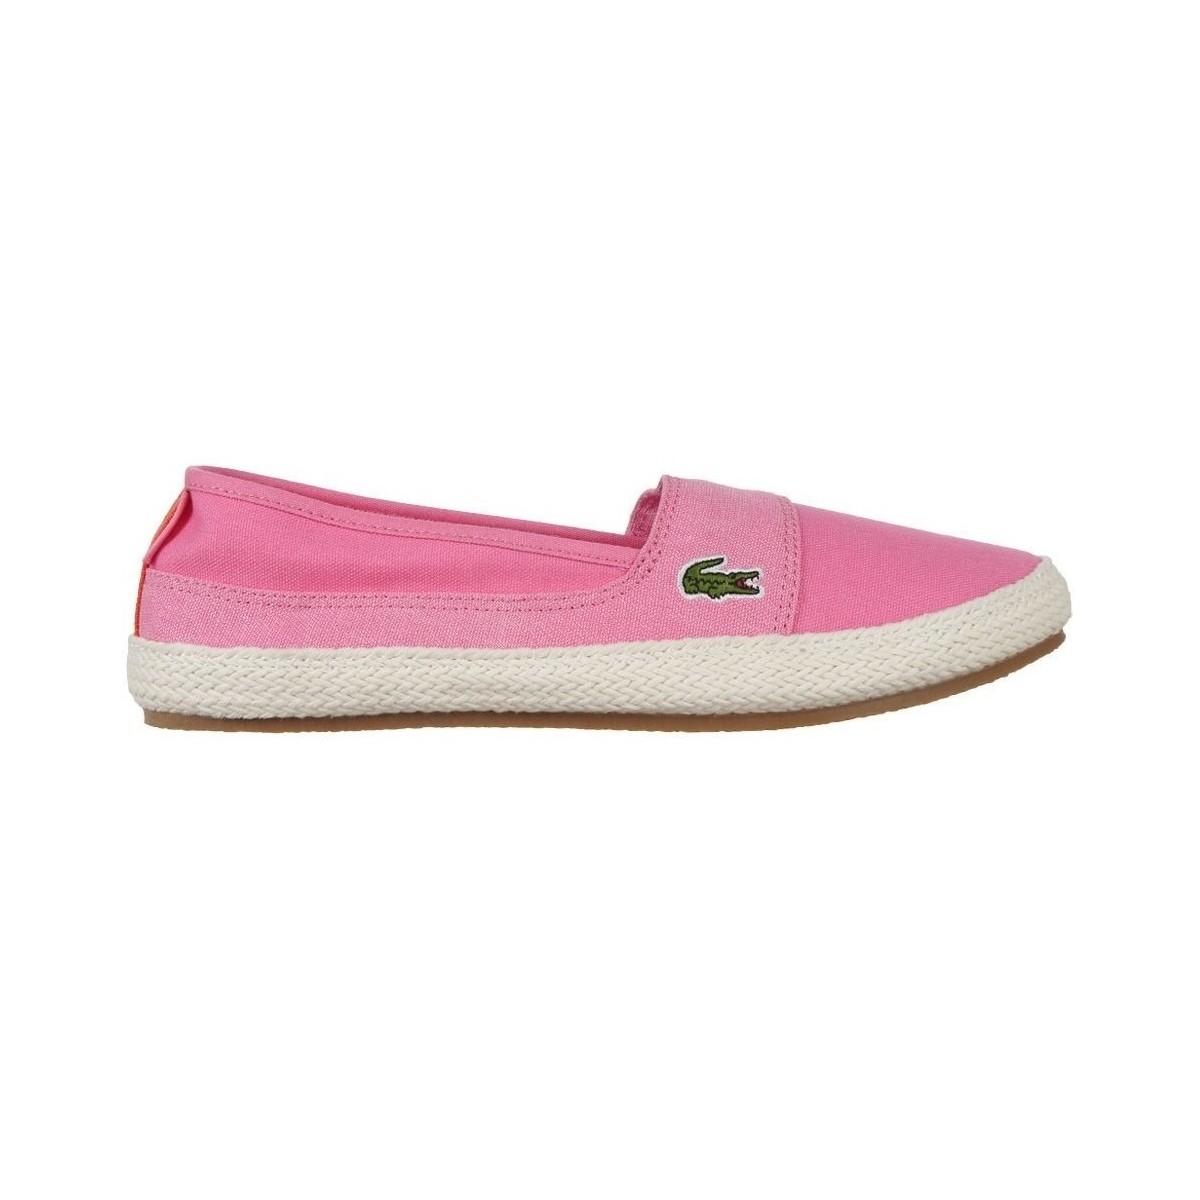 Chaussures Femme Baskets basses Lacoste Marice 218 1 Caw Rose